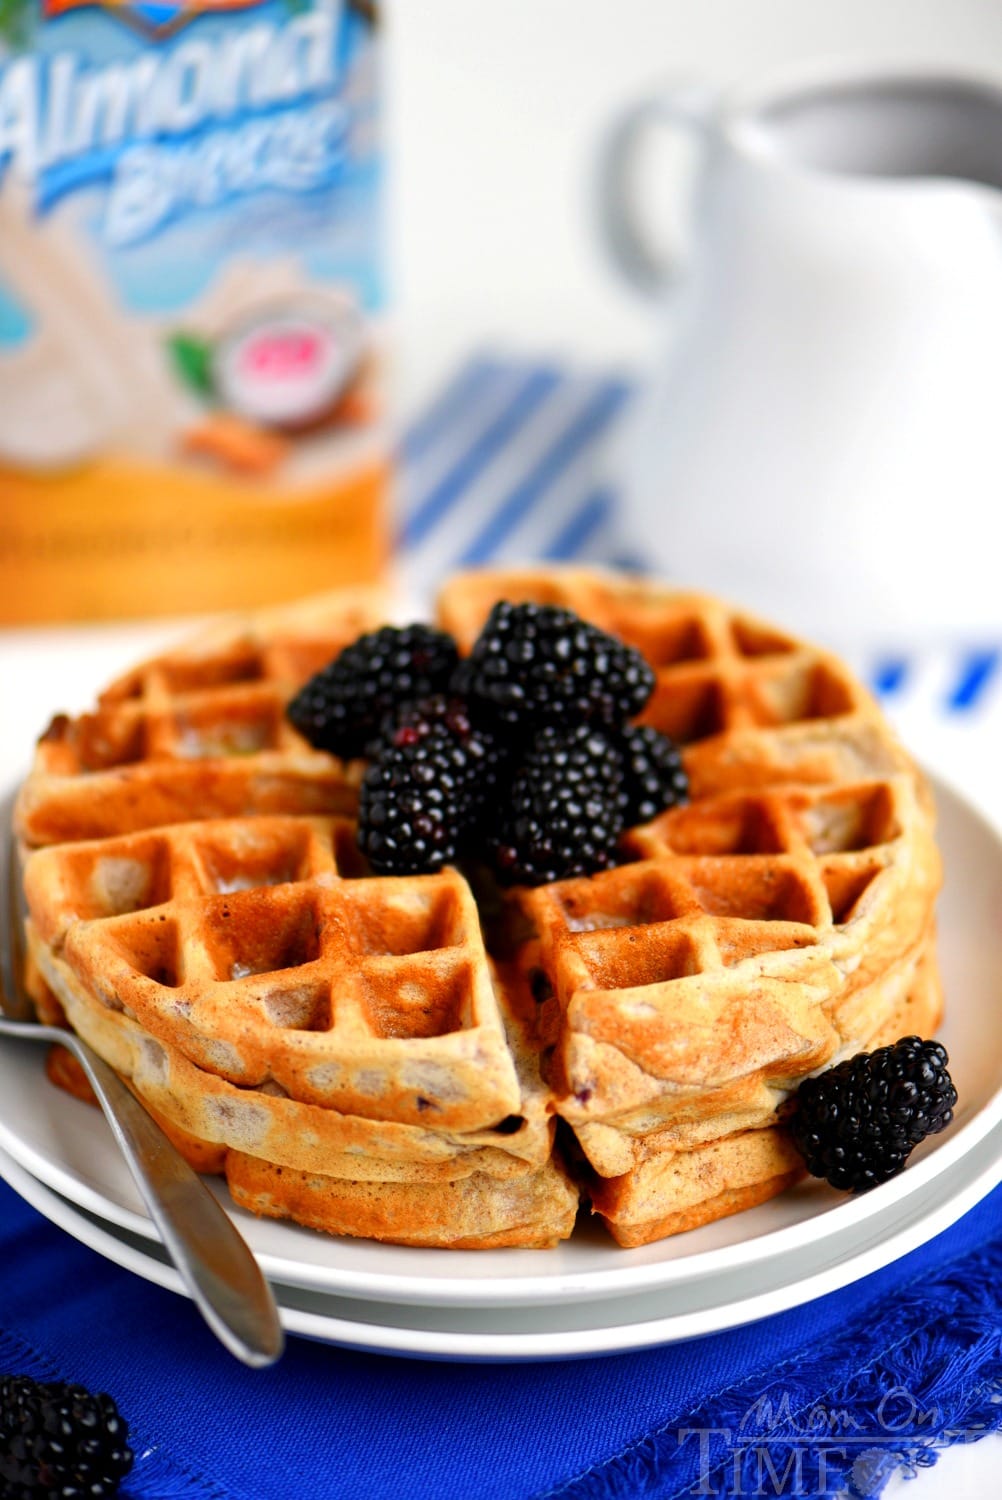 Better-for-you Overnight Blackberry Yeast Waffles with blackberry syrup - breakfast has never looked so good! Five minutes of work the night before delivers the most amazingly delicious waffles the next morning!